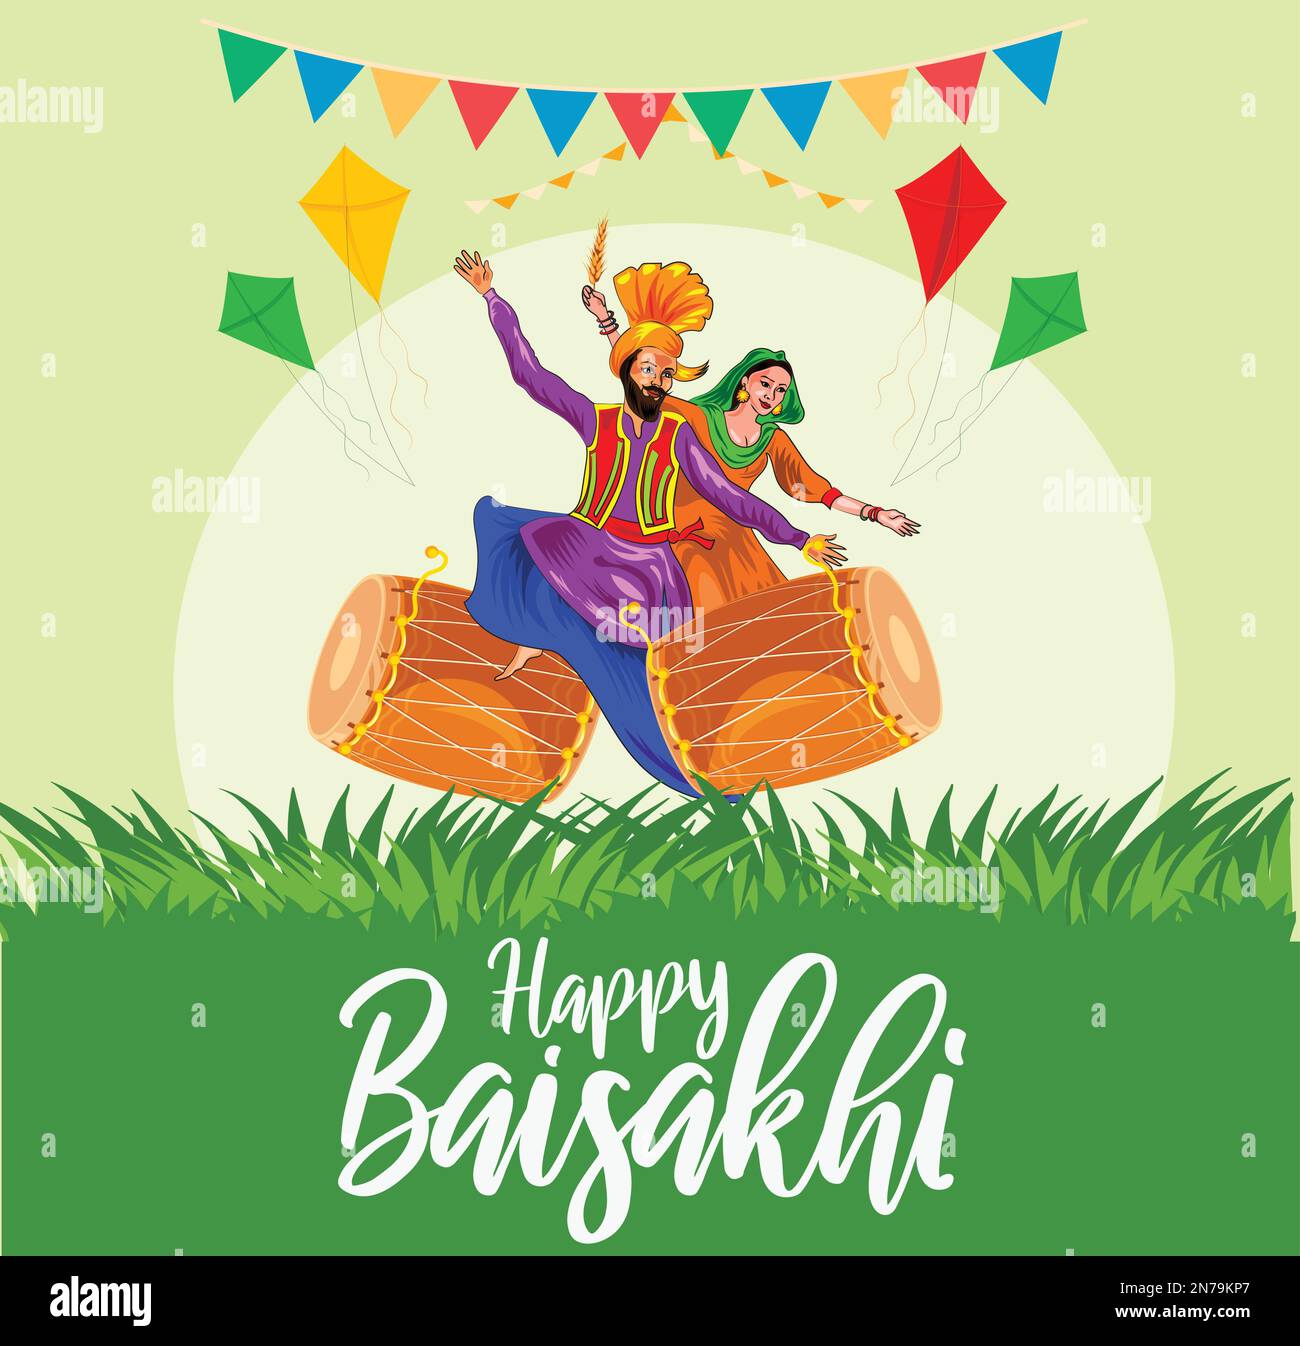 Navyansh Art - Happy Baisakhi drawing watch this video on Youtube👇  youtube.com/video/DqjGLlDJZz8 Please like, share, comment, and subscribe to  my channel for more videos. | Facebook